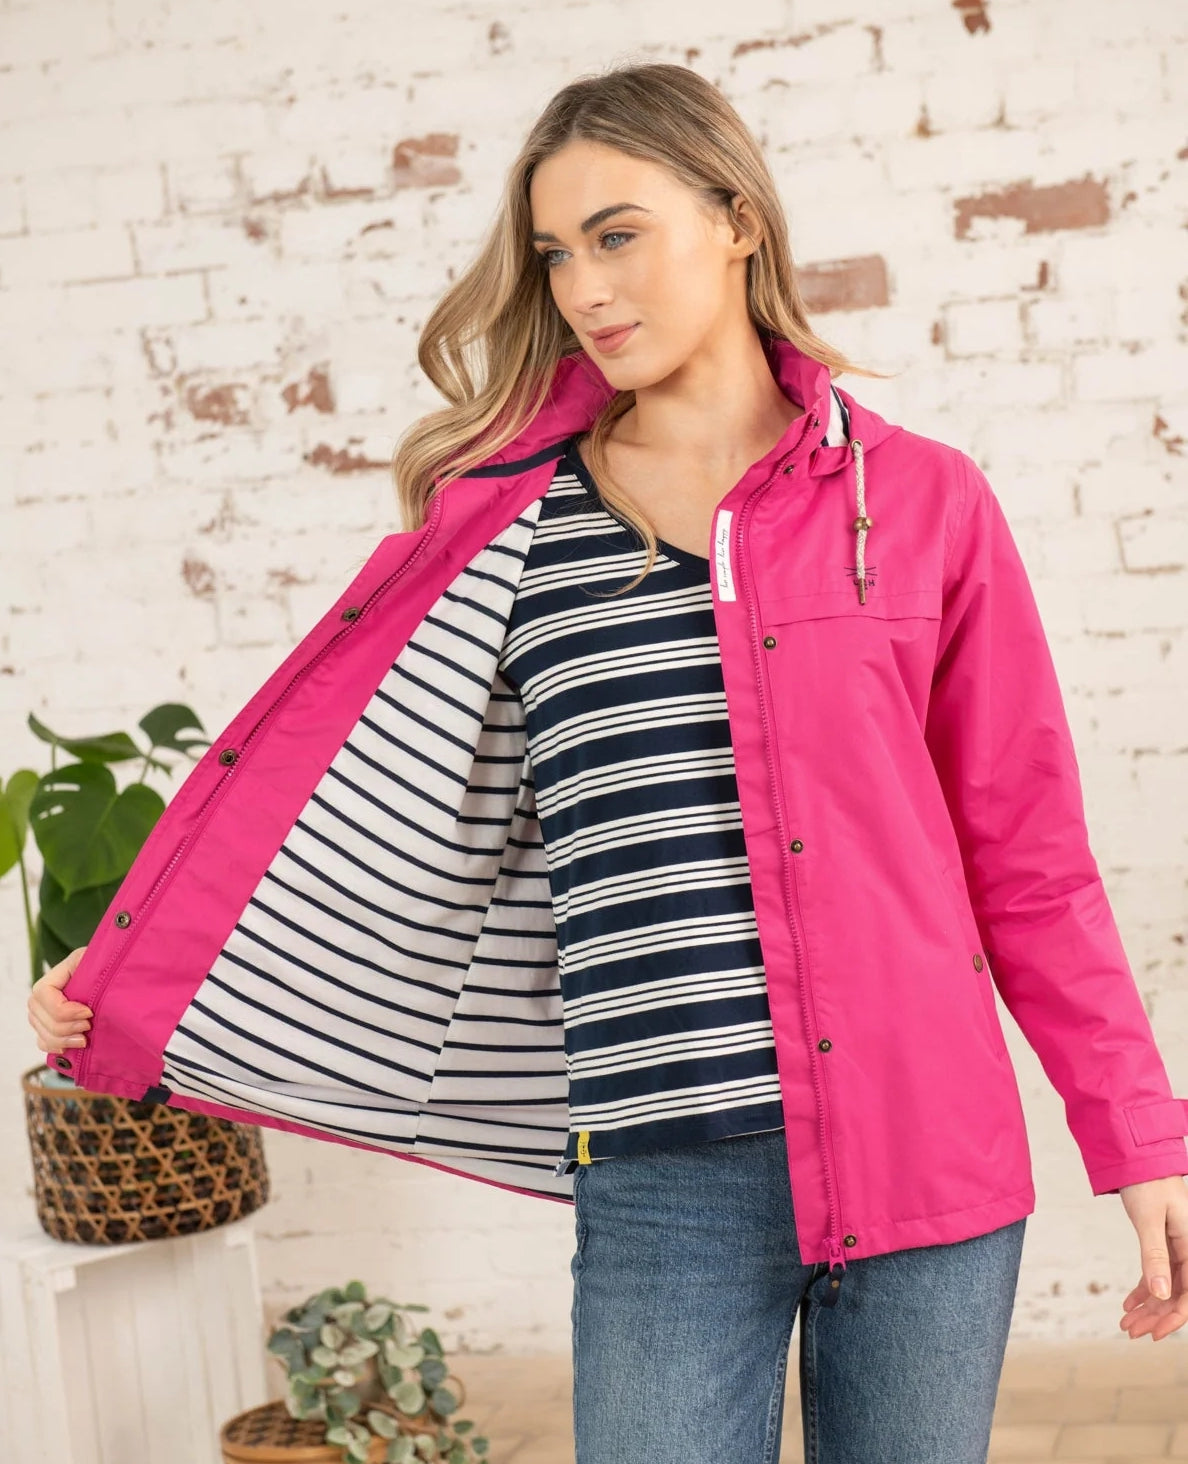 Lighthouse women's Beachcomber waterproof jacket in pink with a stripe lining.